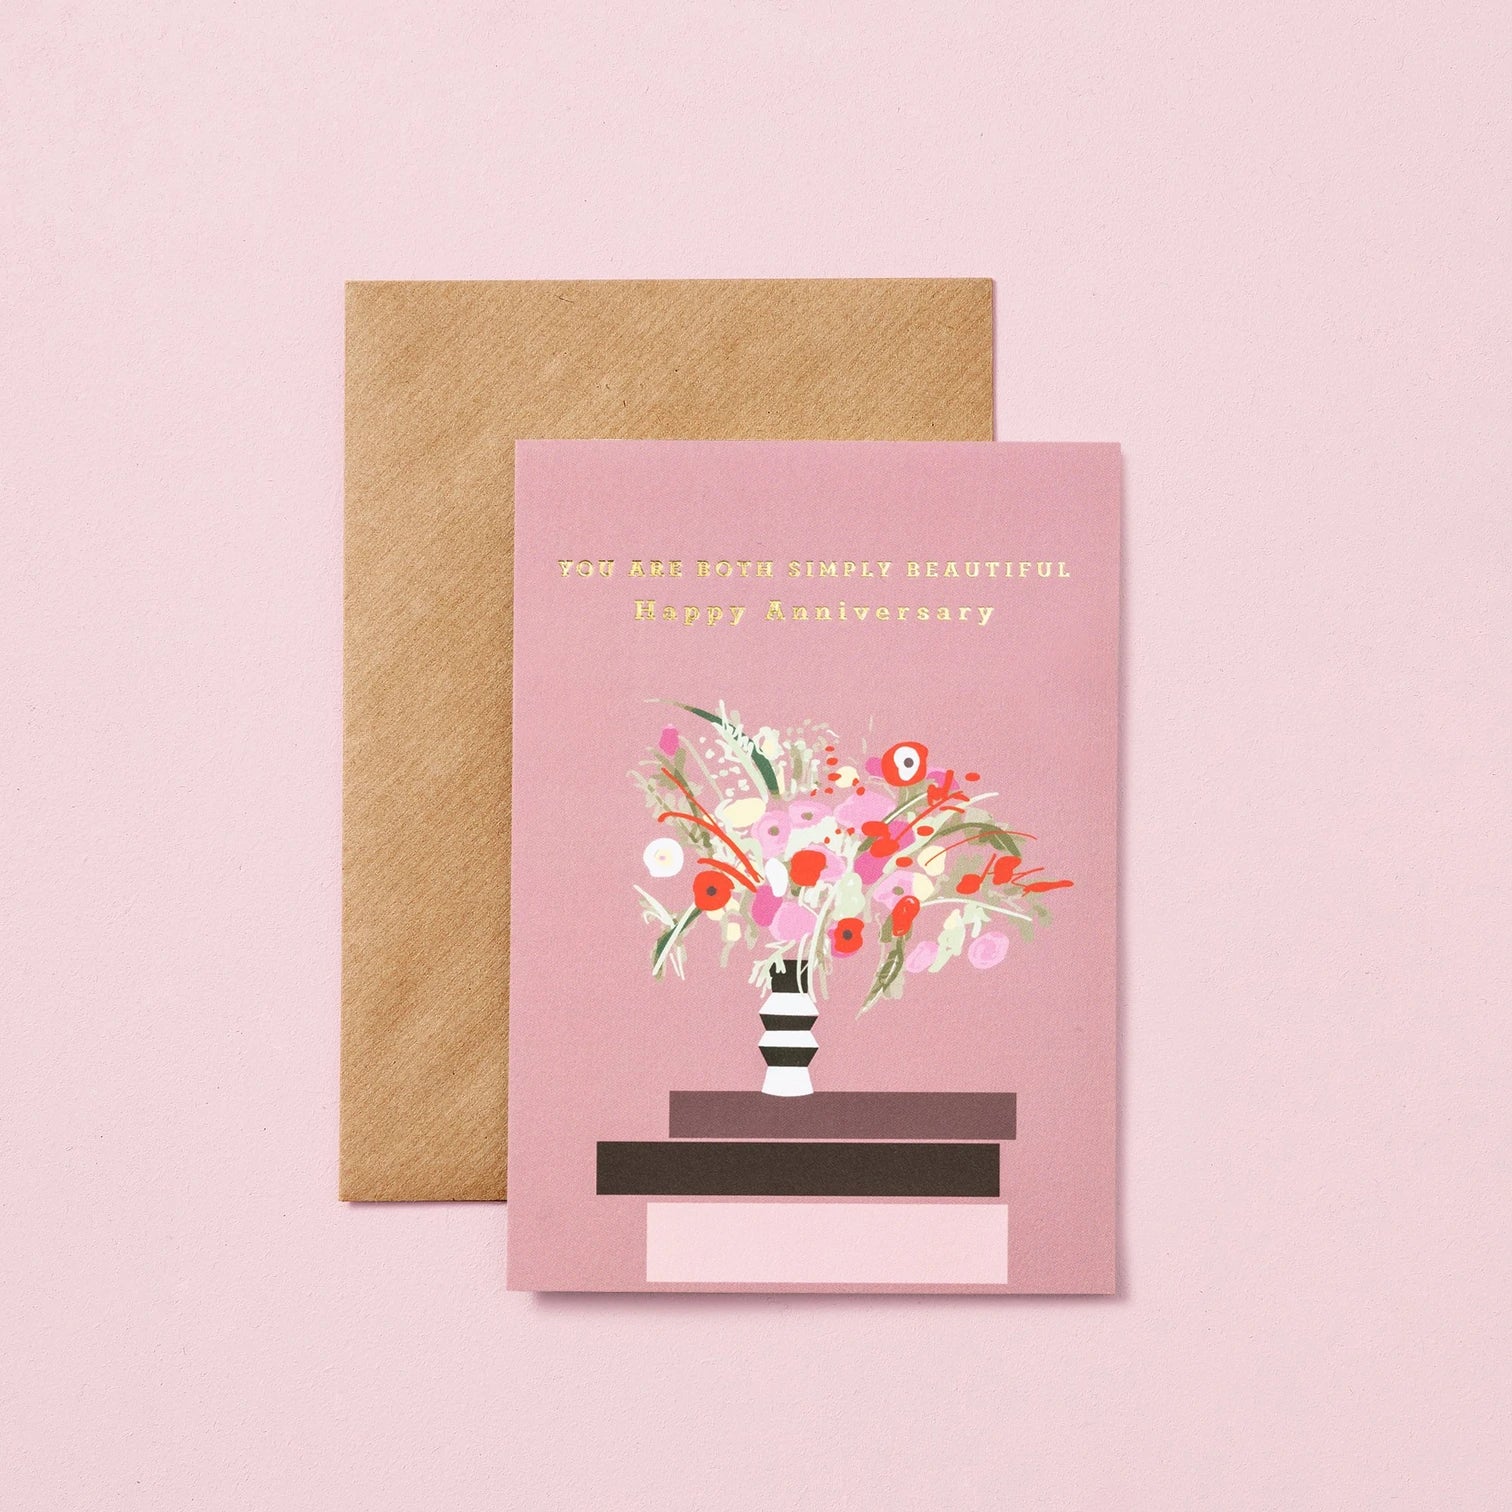 YOU ARE BOTH SIMPLY BEAUTIFUL...| CARD BY TYPE AND STORY